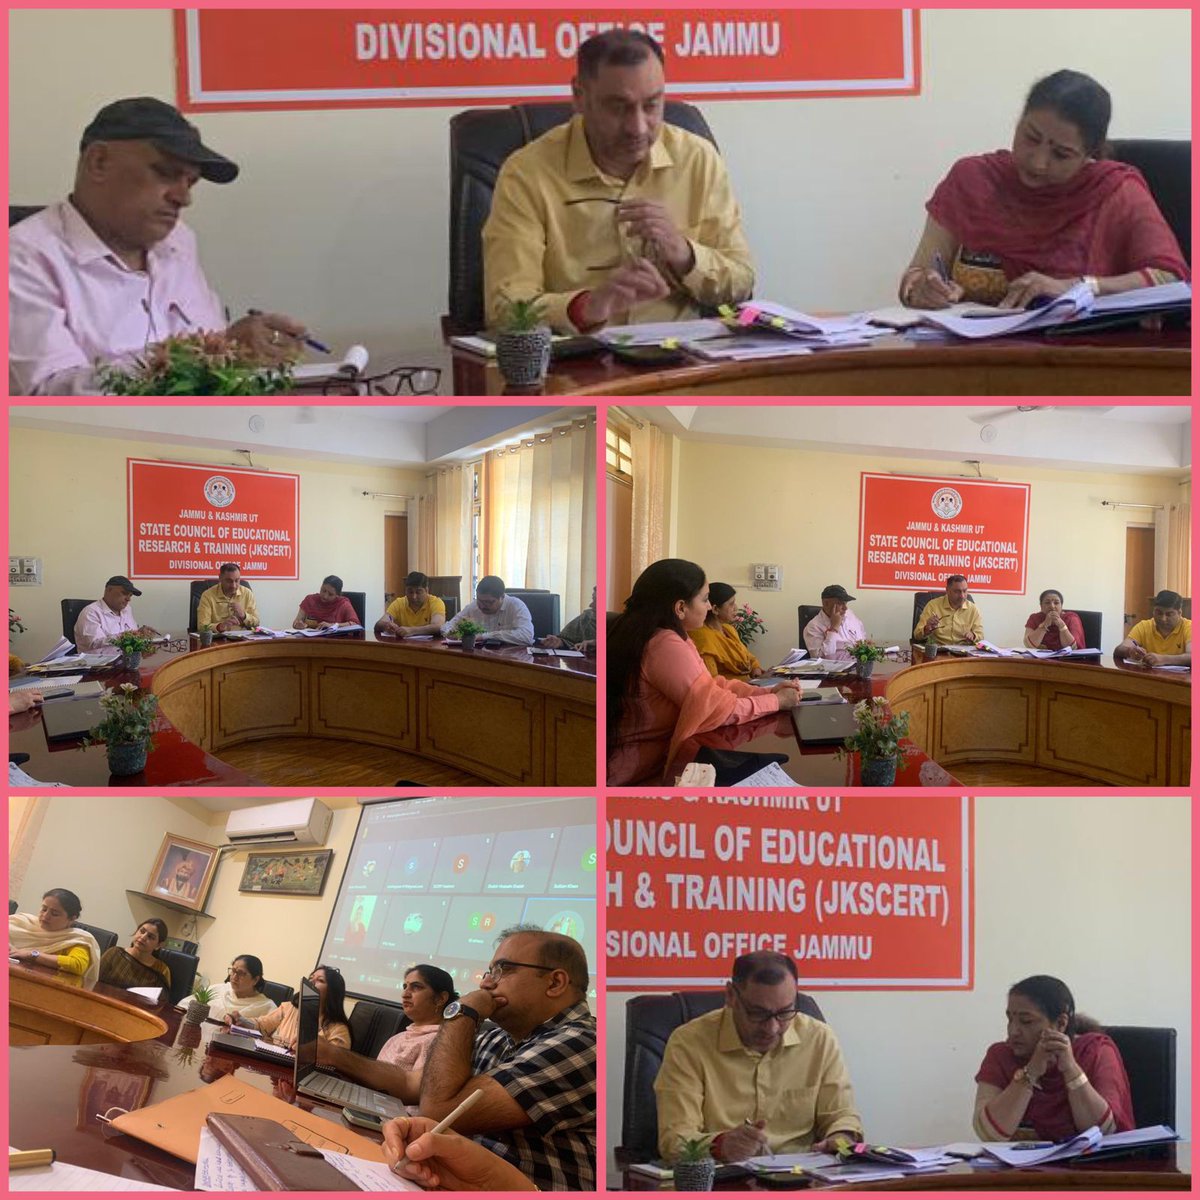 The meeting was held today at JKSCERT Divisional Office Jammu, in which Director Prof. (Dr.) Parikshat Singh Manhas, Joint Director Central Move Office Sh. H.R. Pakhroo, Joint Director, JKSCERT Jammu Division, Prof. (Dr.)Sindhu Kapoor and JKSCERT faculty members participated.